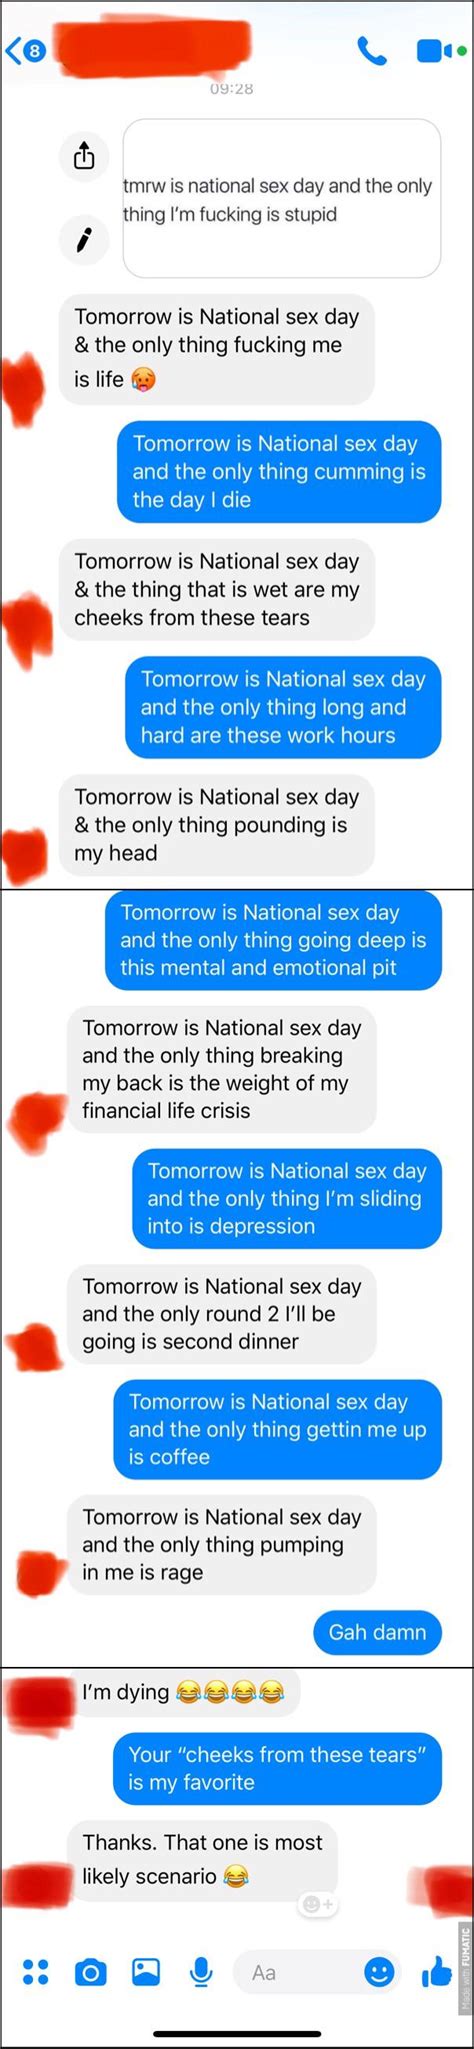 have a happy national sex day y all ~ damn funny thing